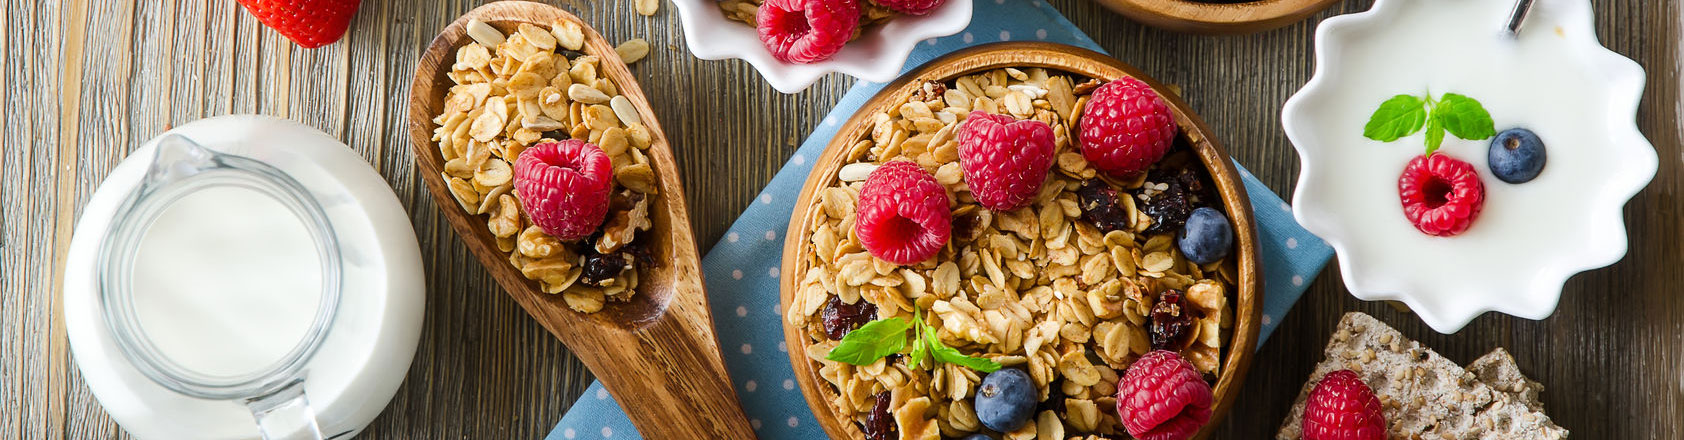 how to buy and make healthy granola